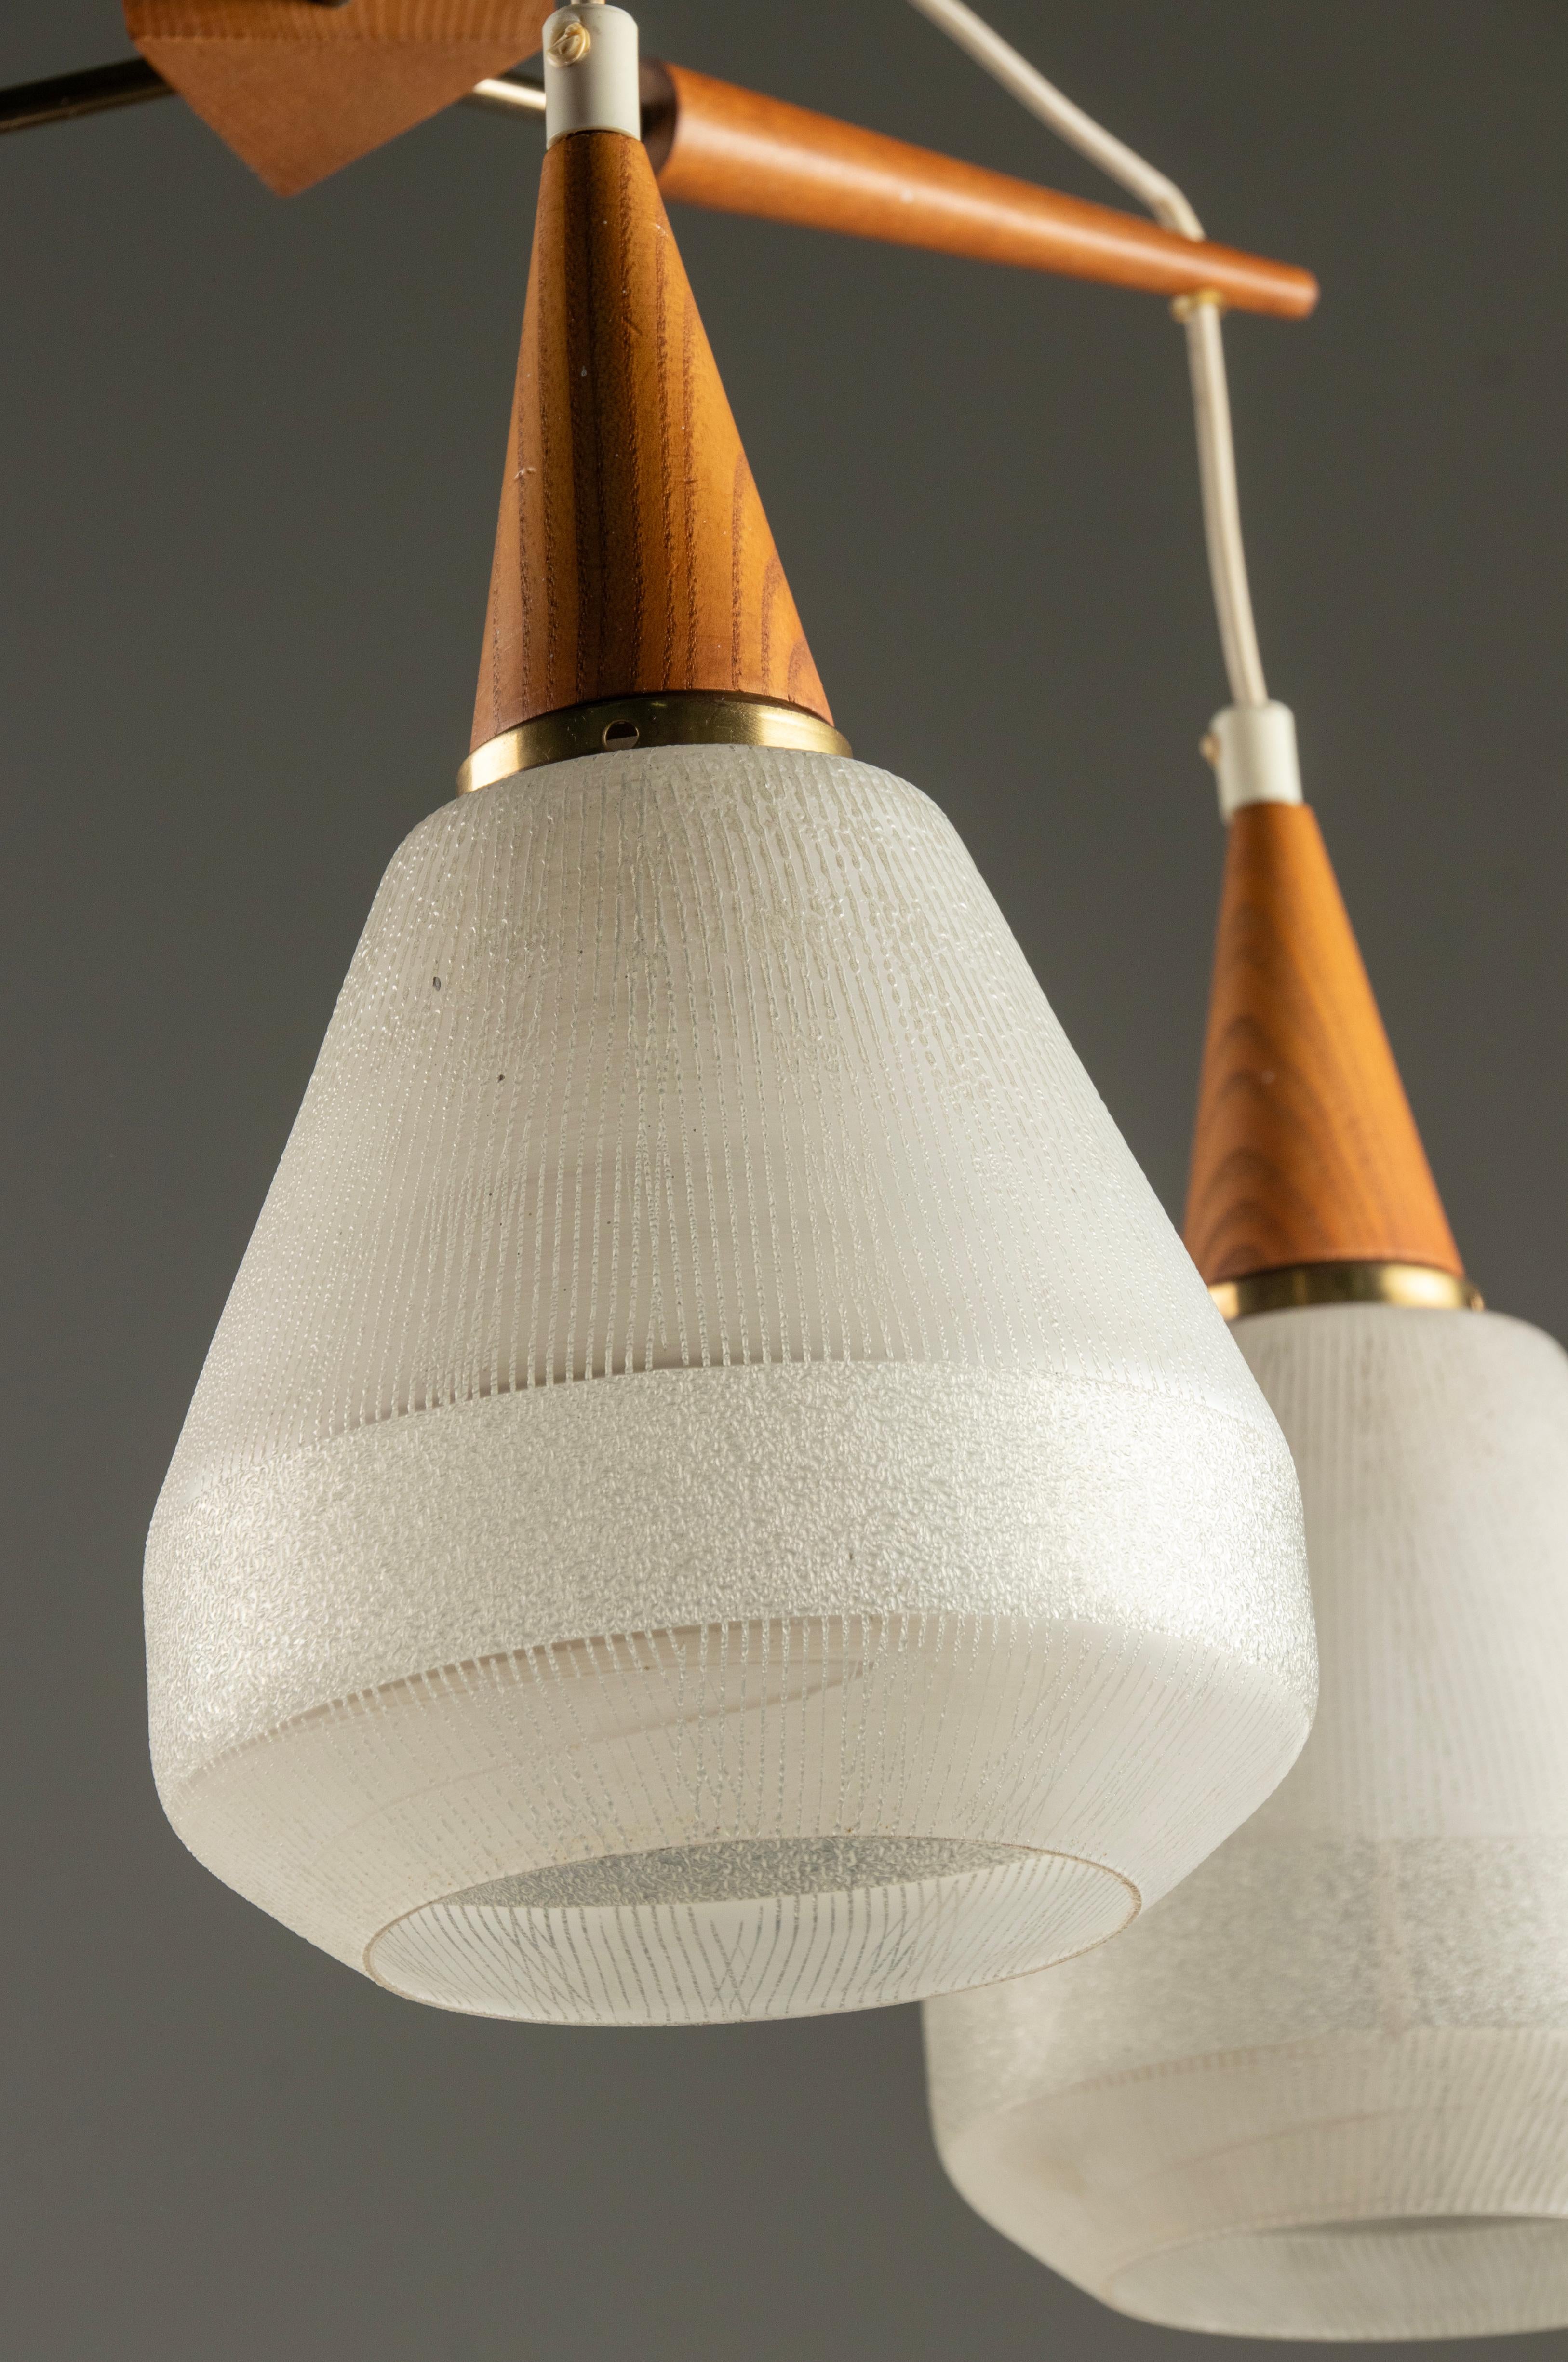 Mid 20th Century Danish Teakwood Pendant Lamp - Frosted Glass Shades For Sale 7